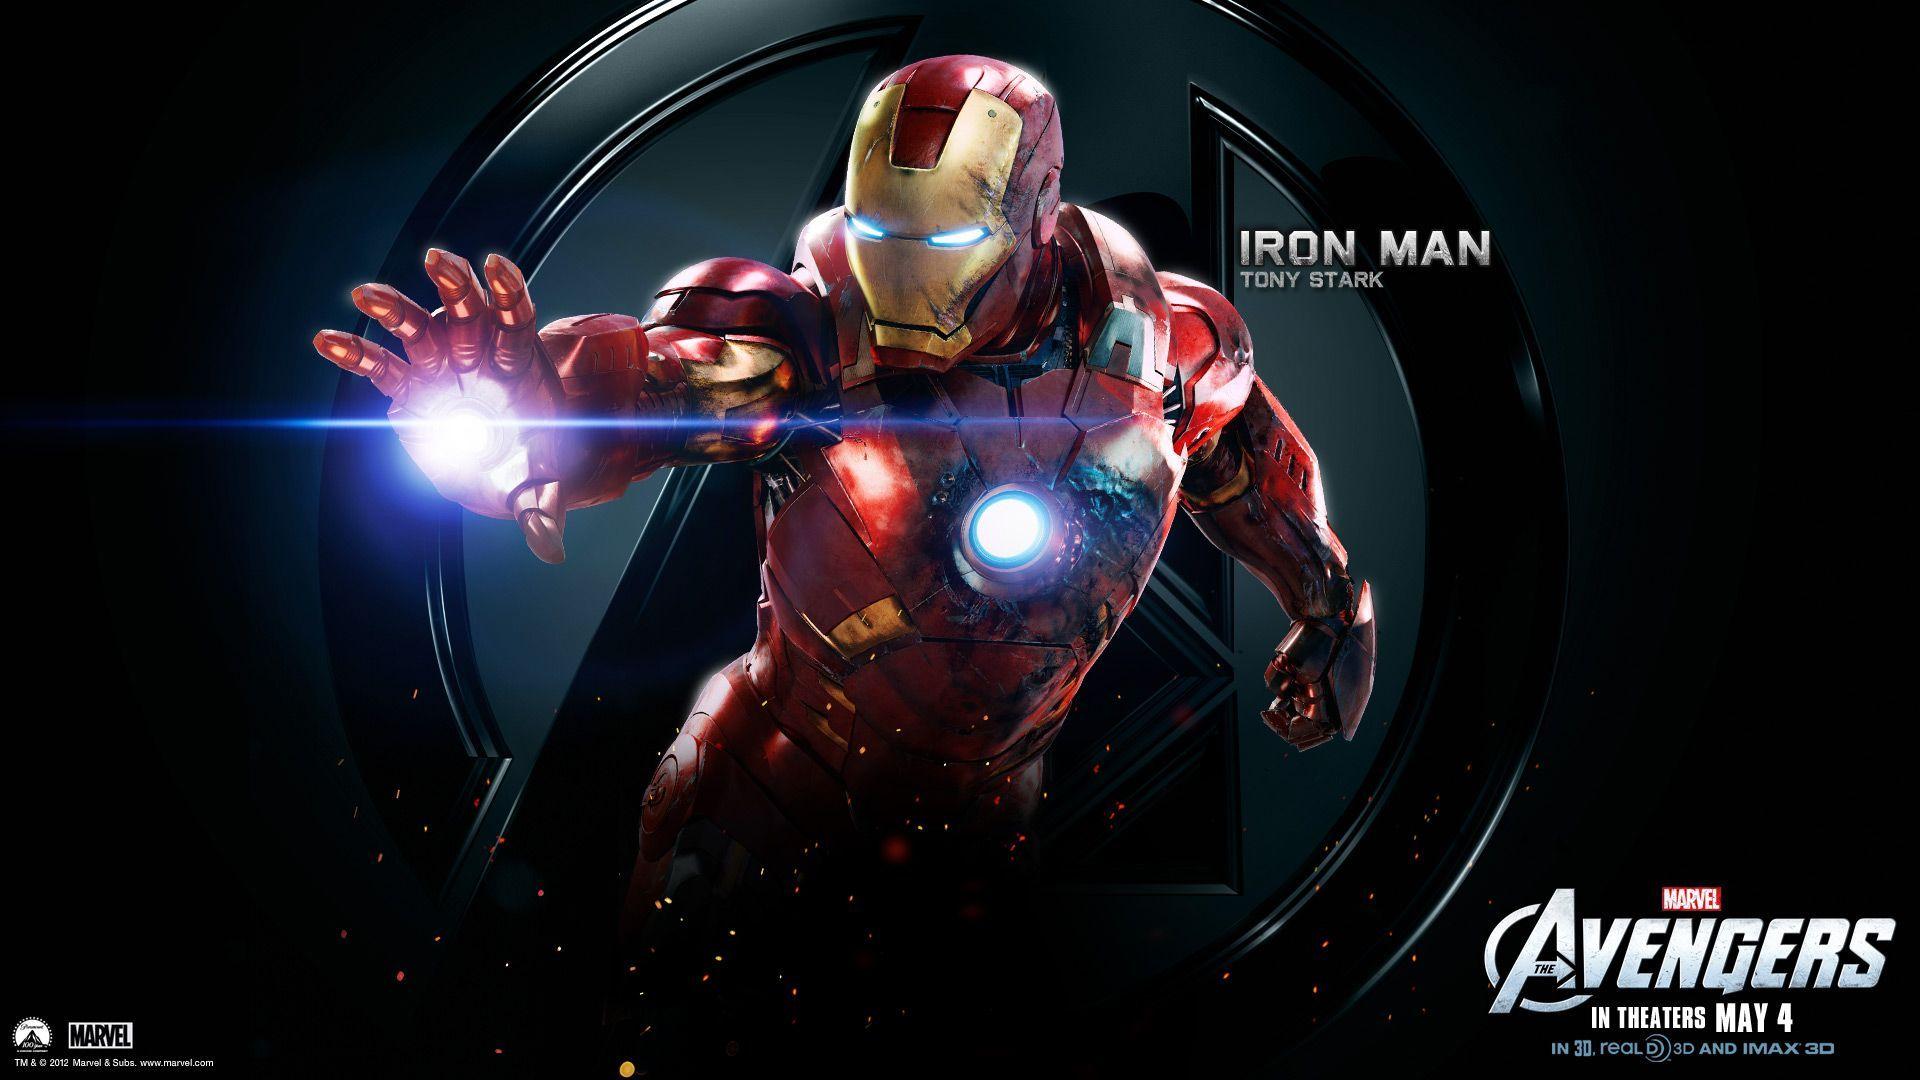 Iron Man, The Avengers That's Right. The New Background On My Computer. Iron Man Wallpaper, Iron Man Avengers, Avengers Wallpaper